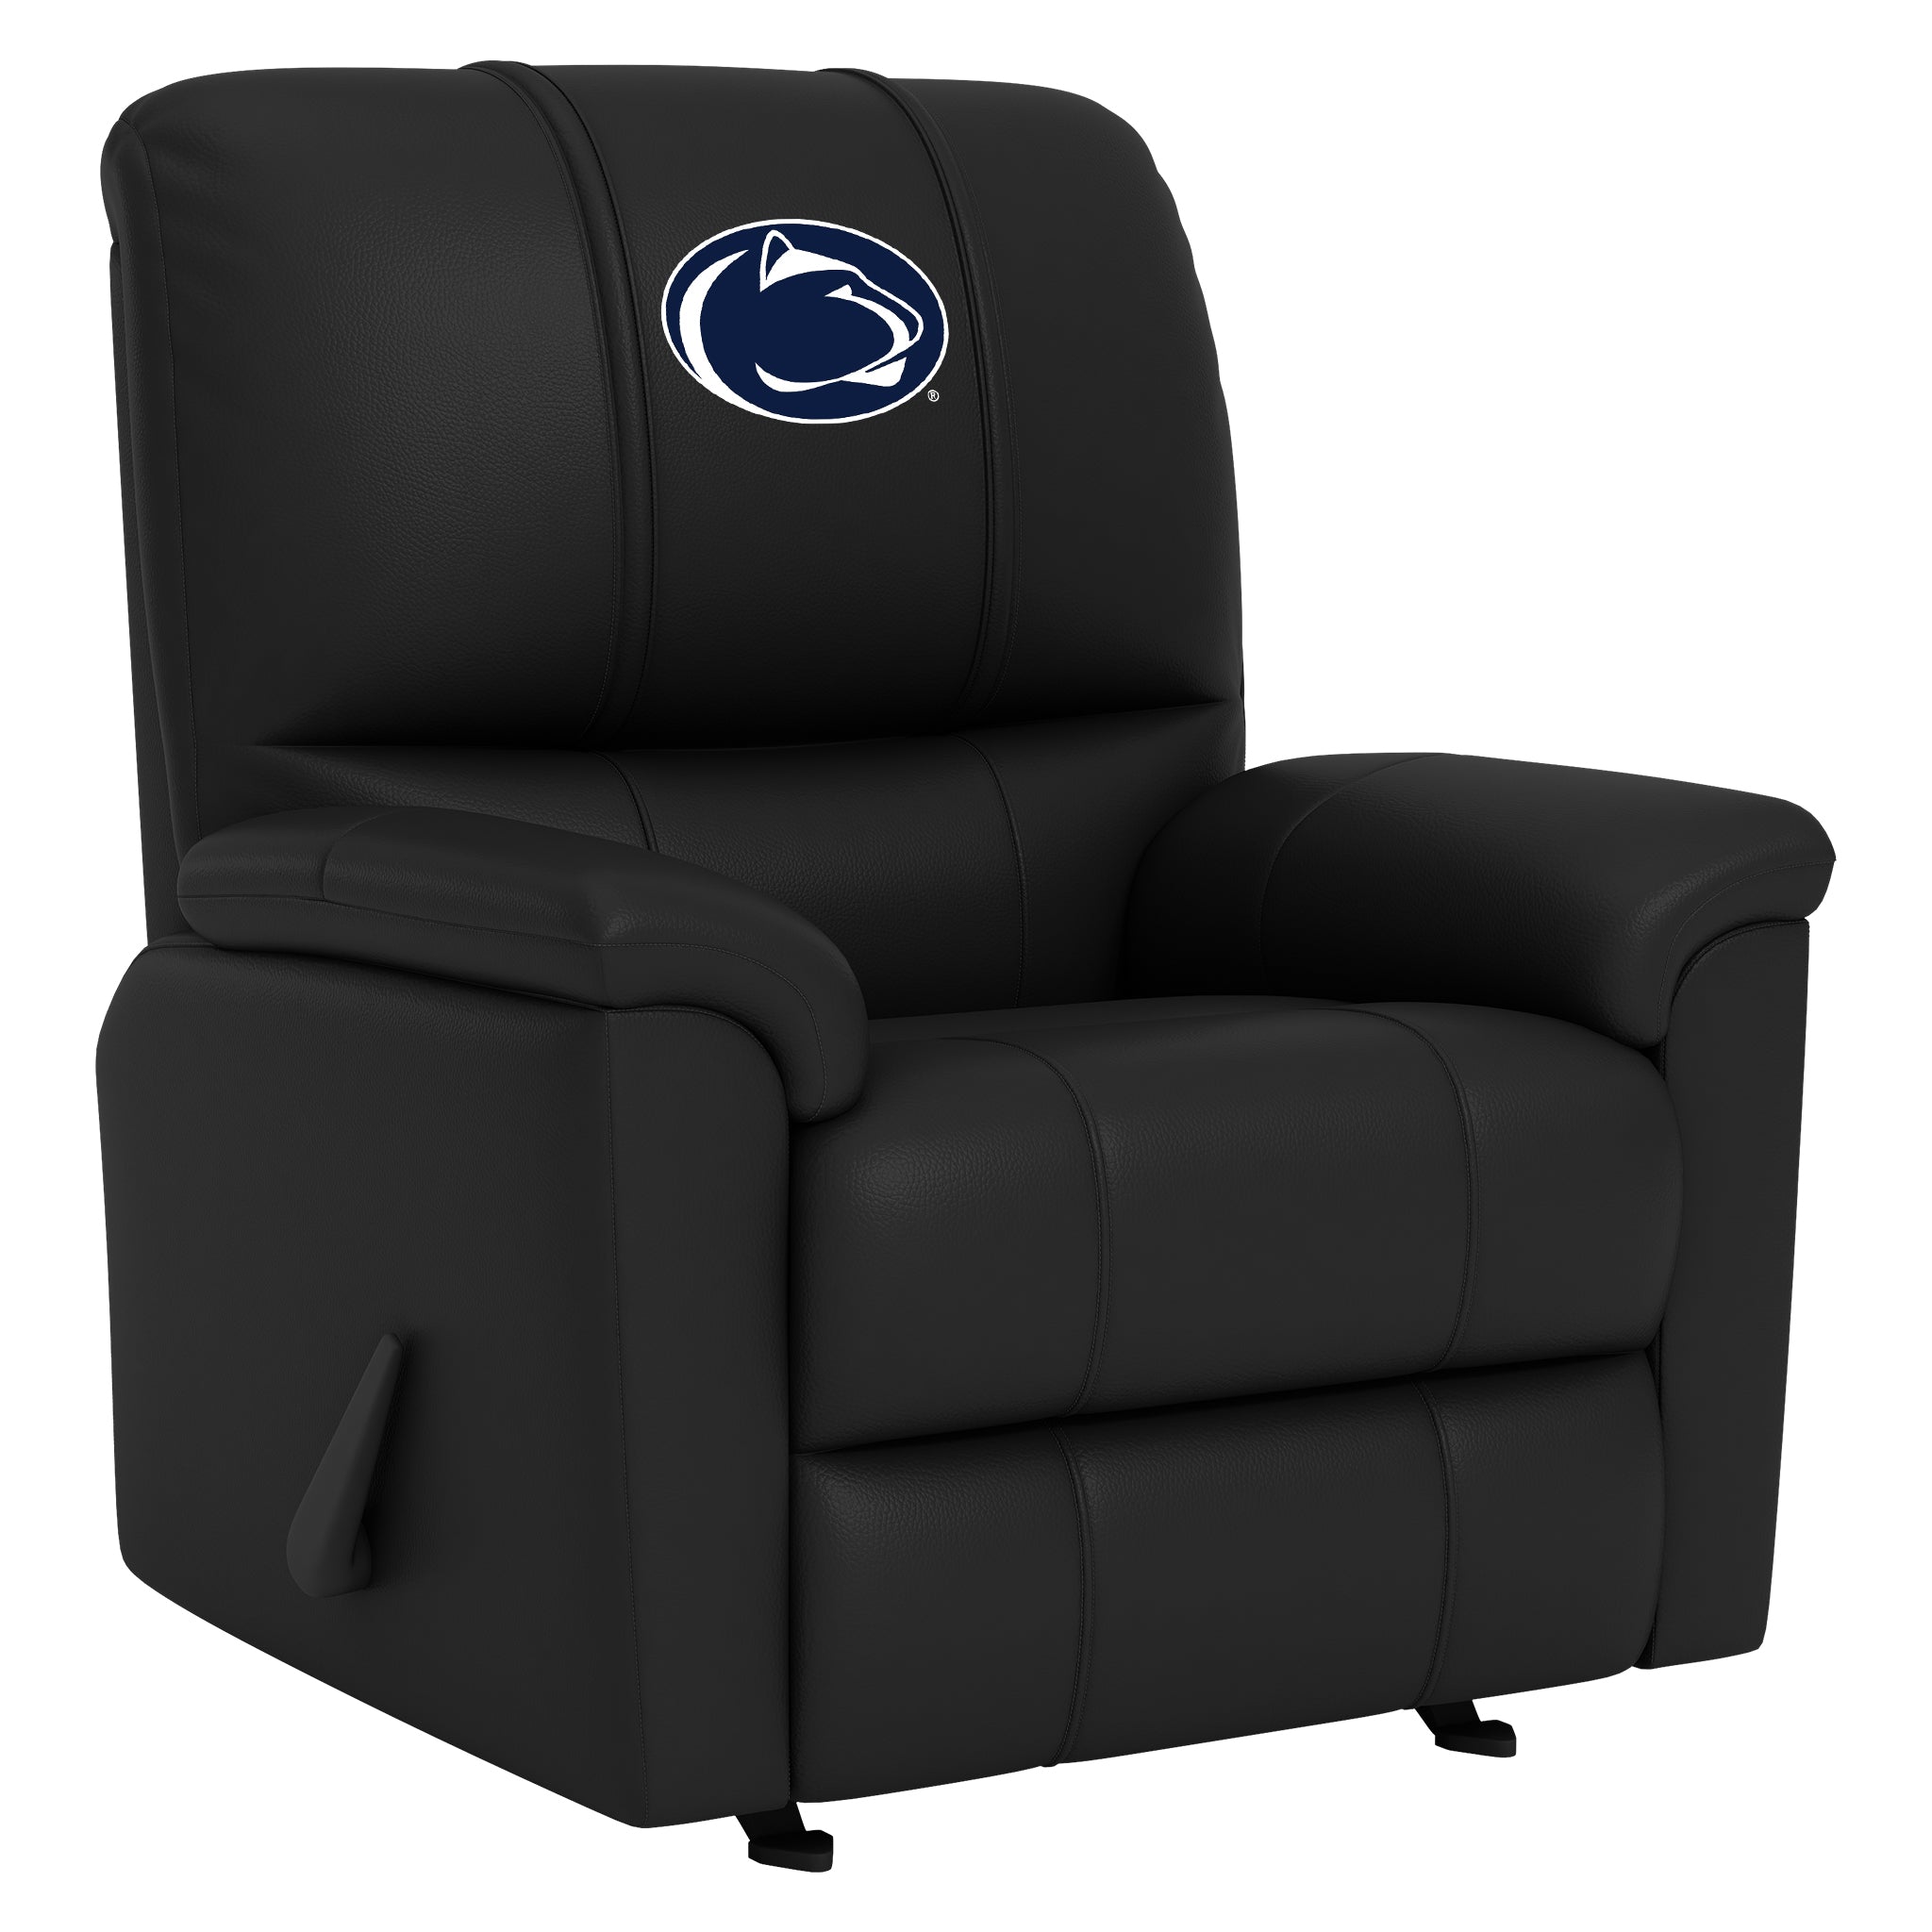 Penn State Nittany Lions Silver Club Chair with Penn State Nittany Lions Logo